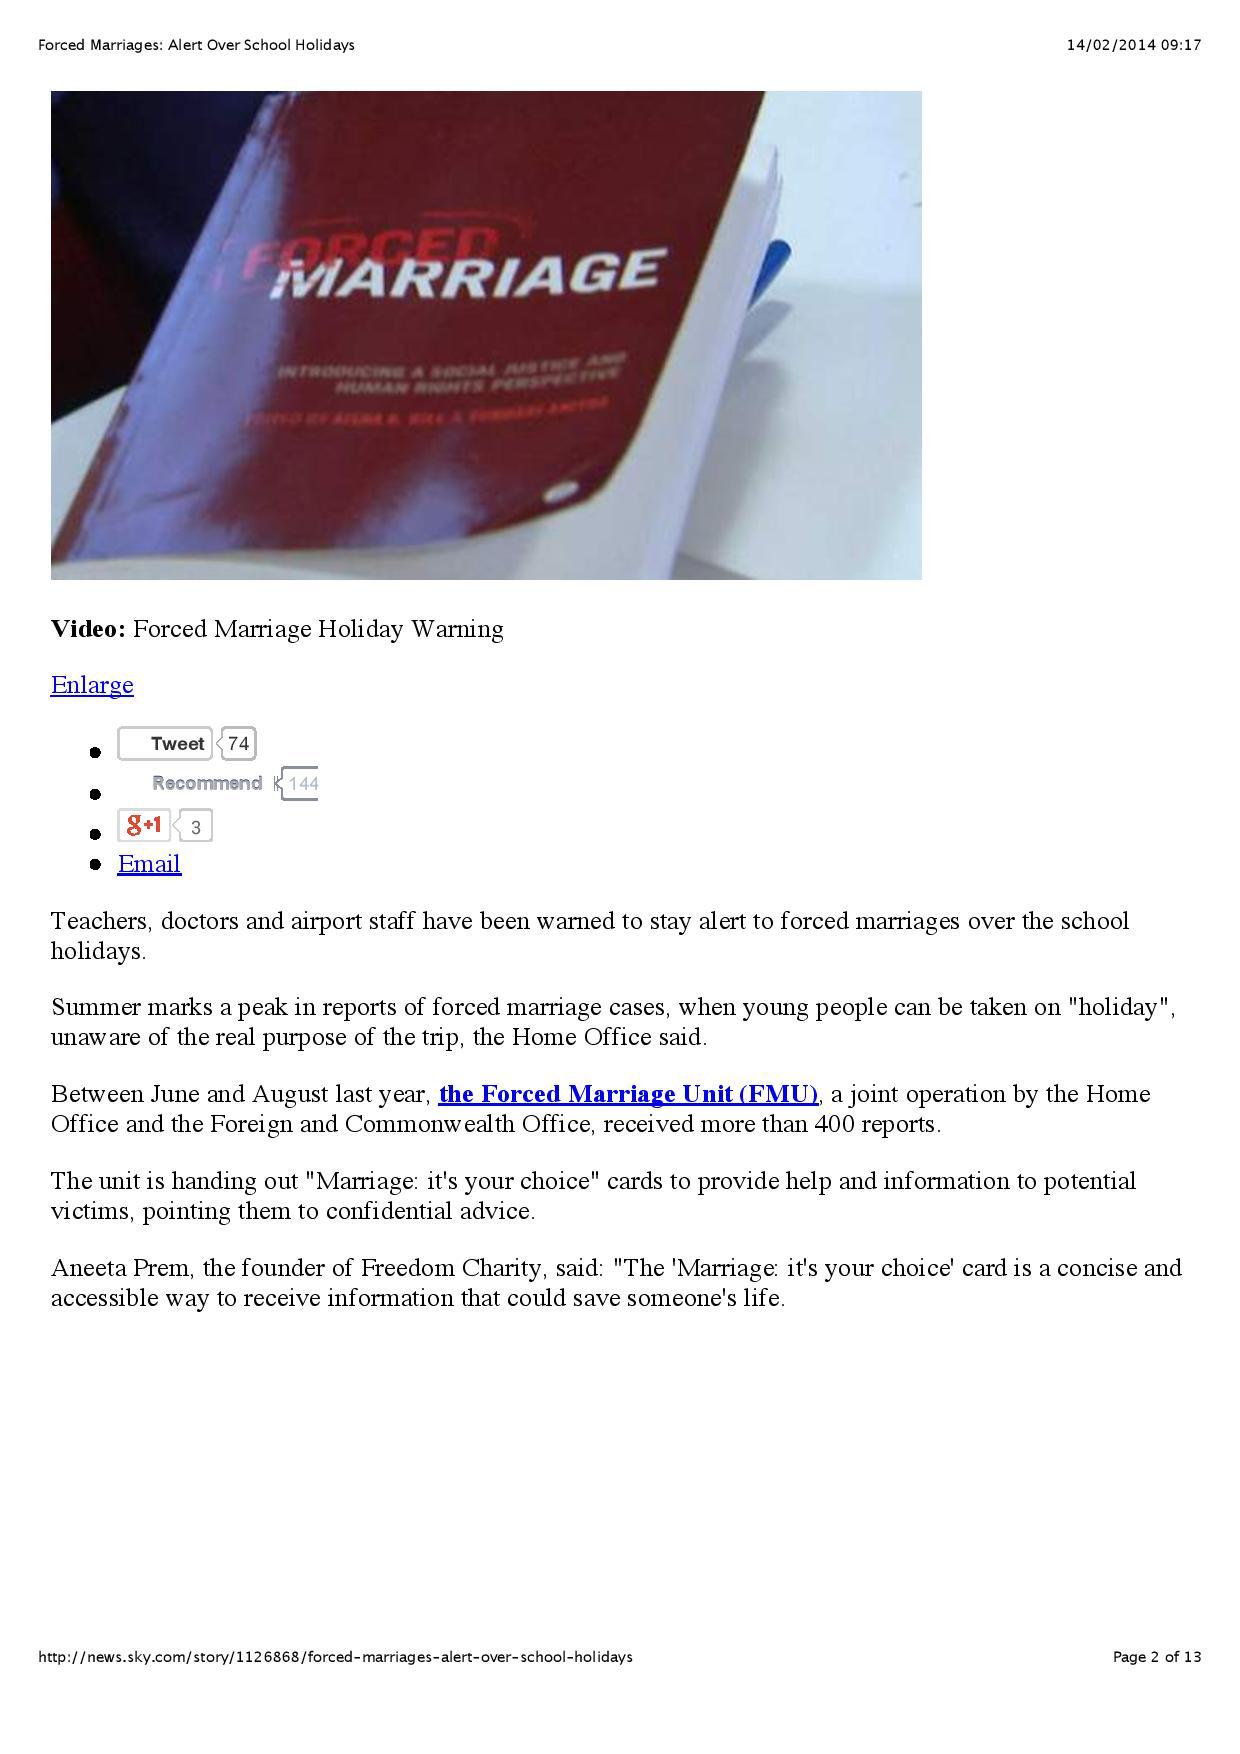 done-sky-forced-marriages-alert-over-school-holidays-page-002